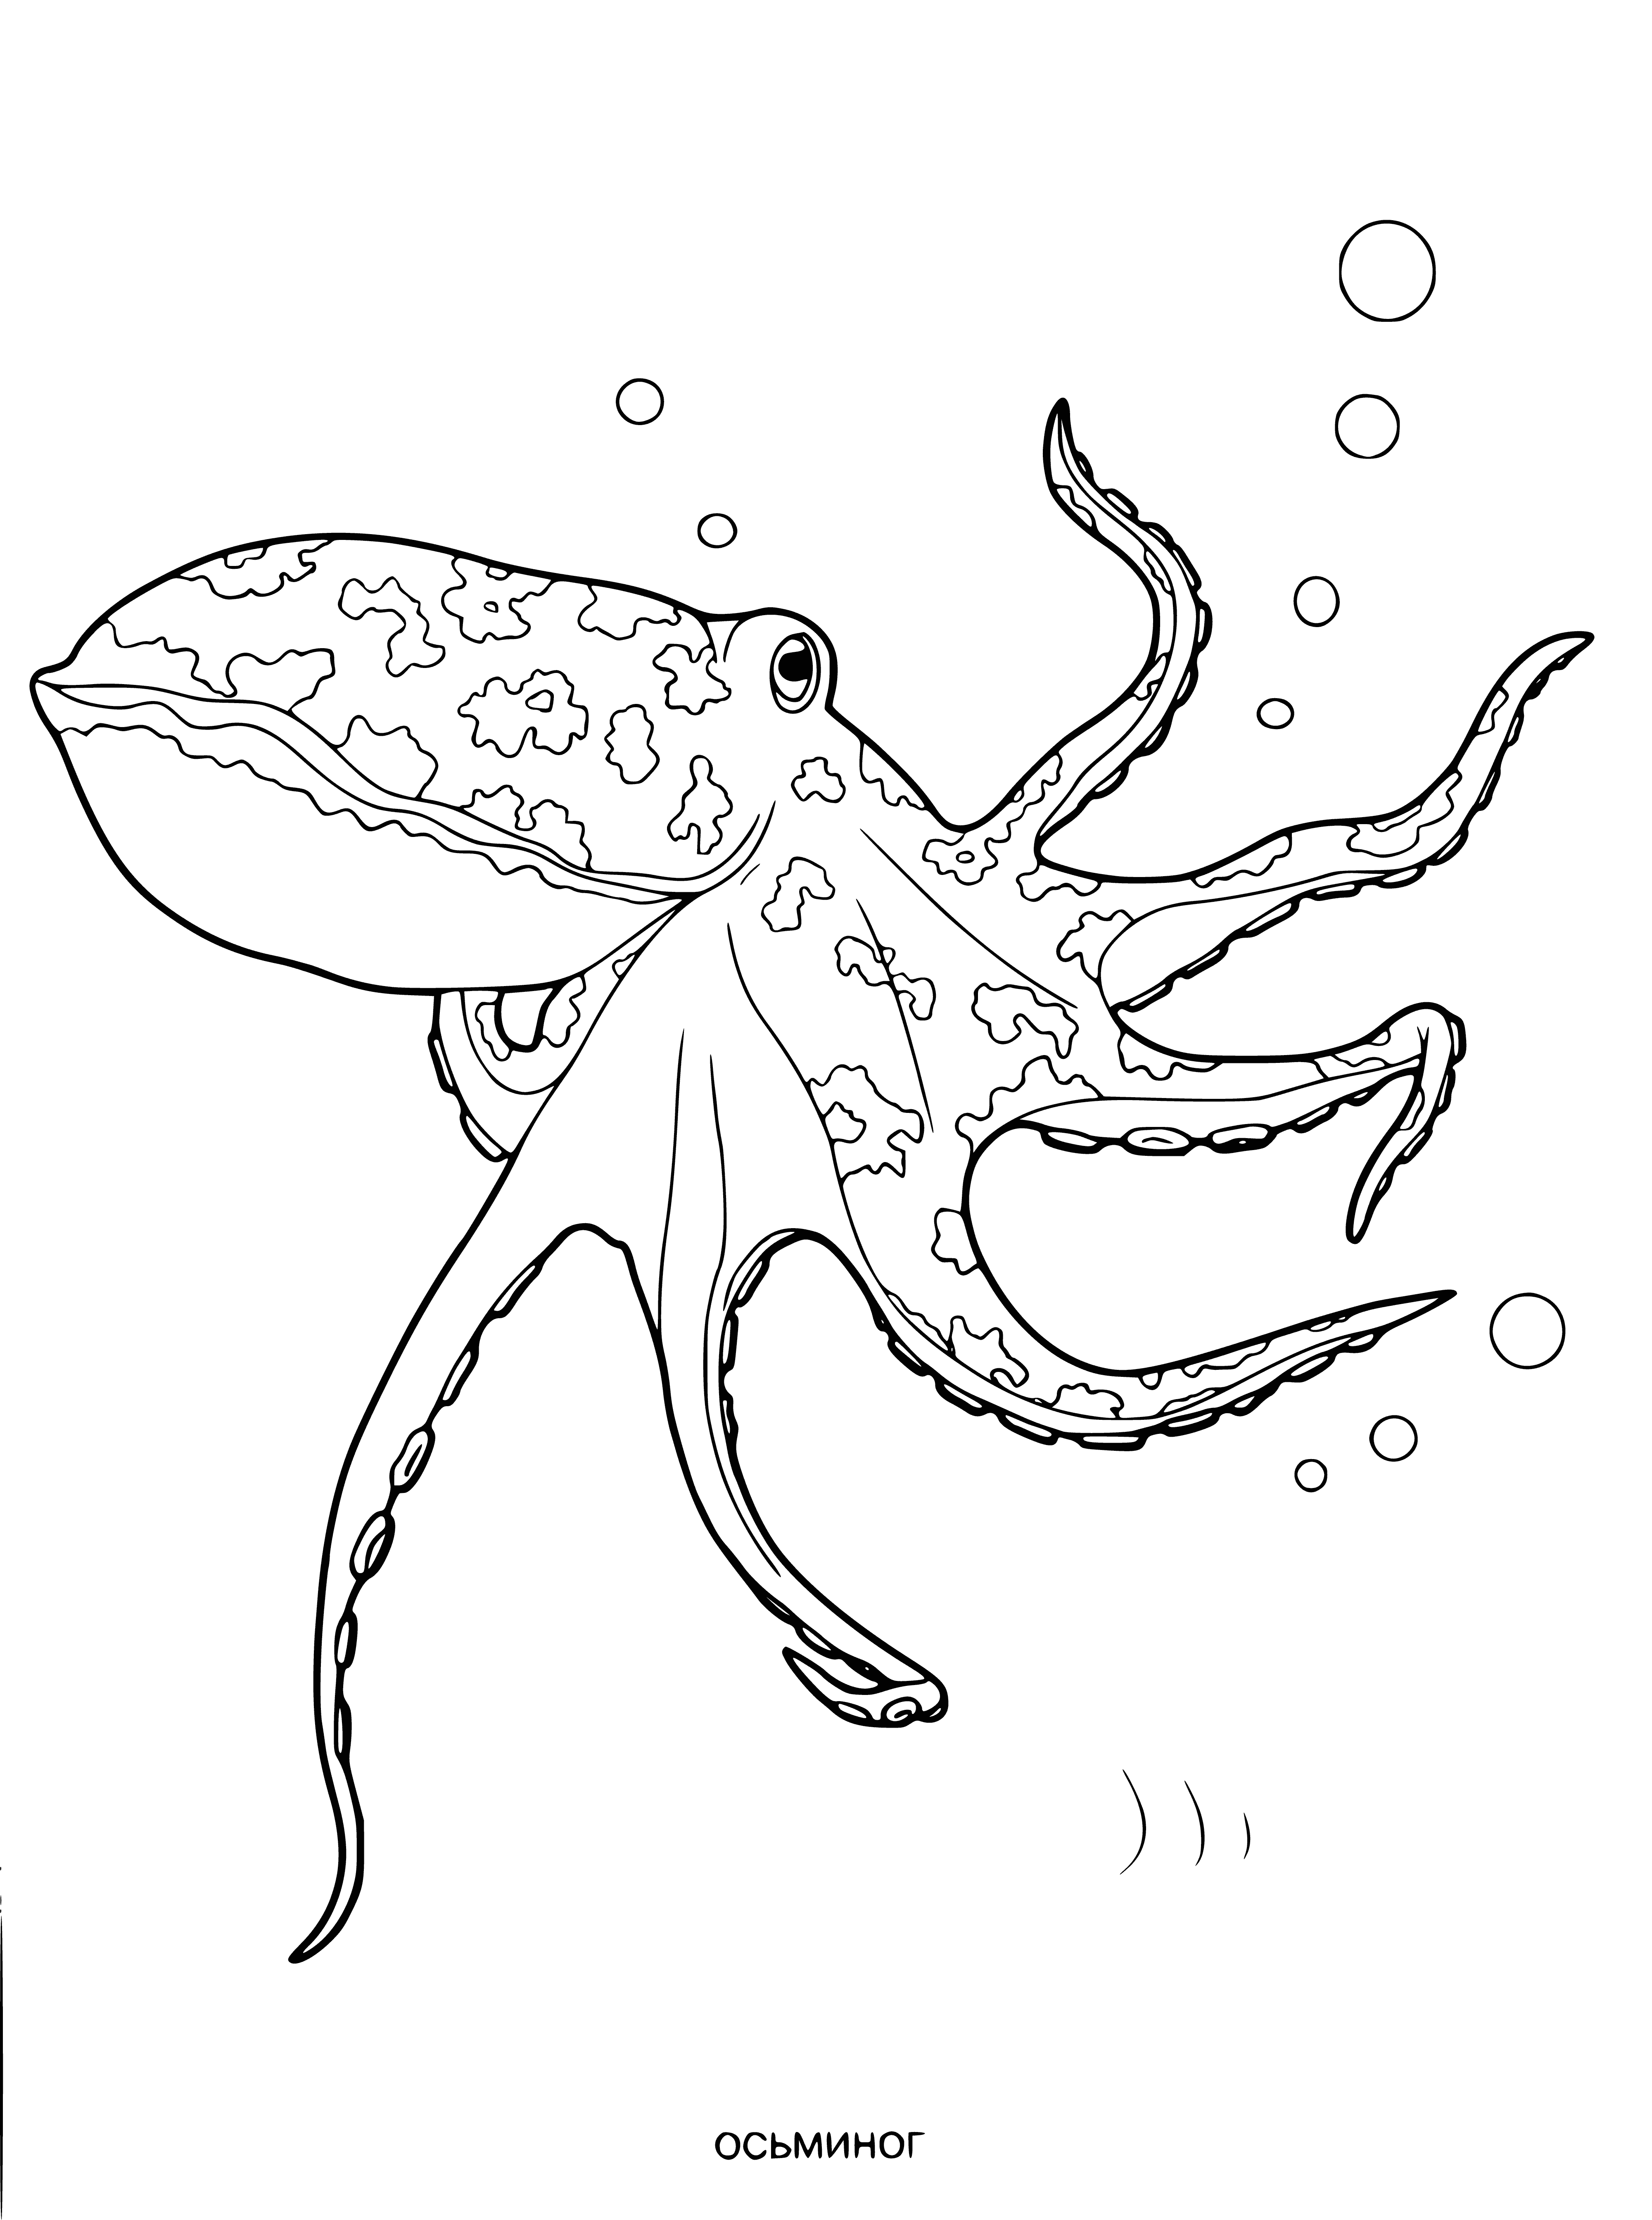 Octopus coloring page